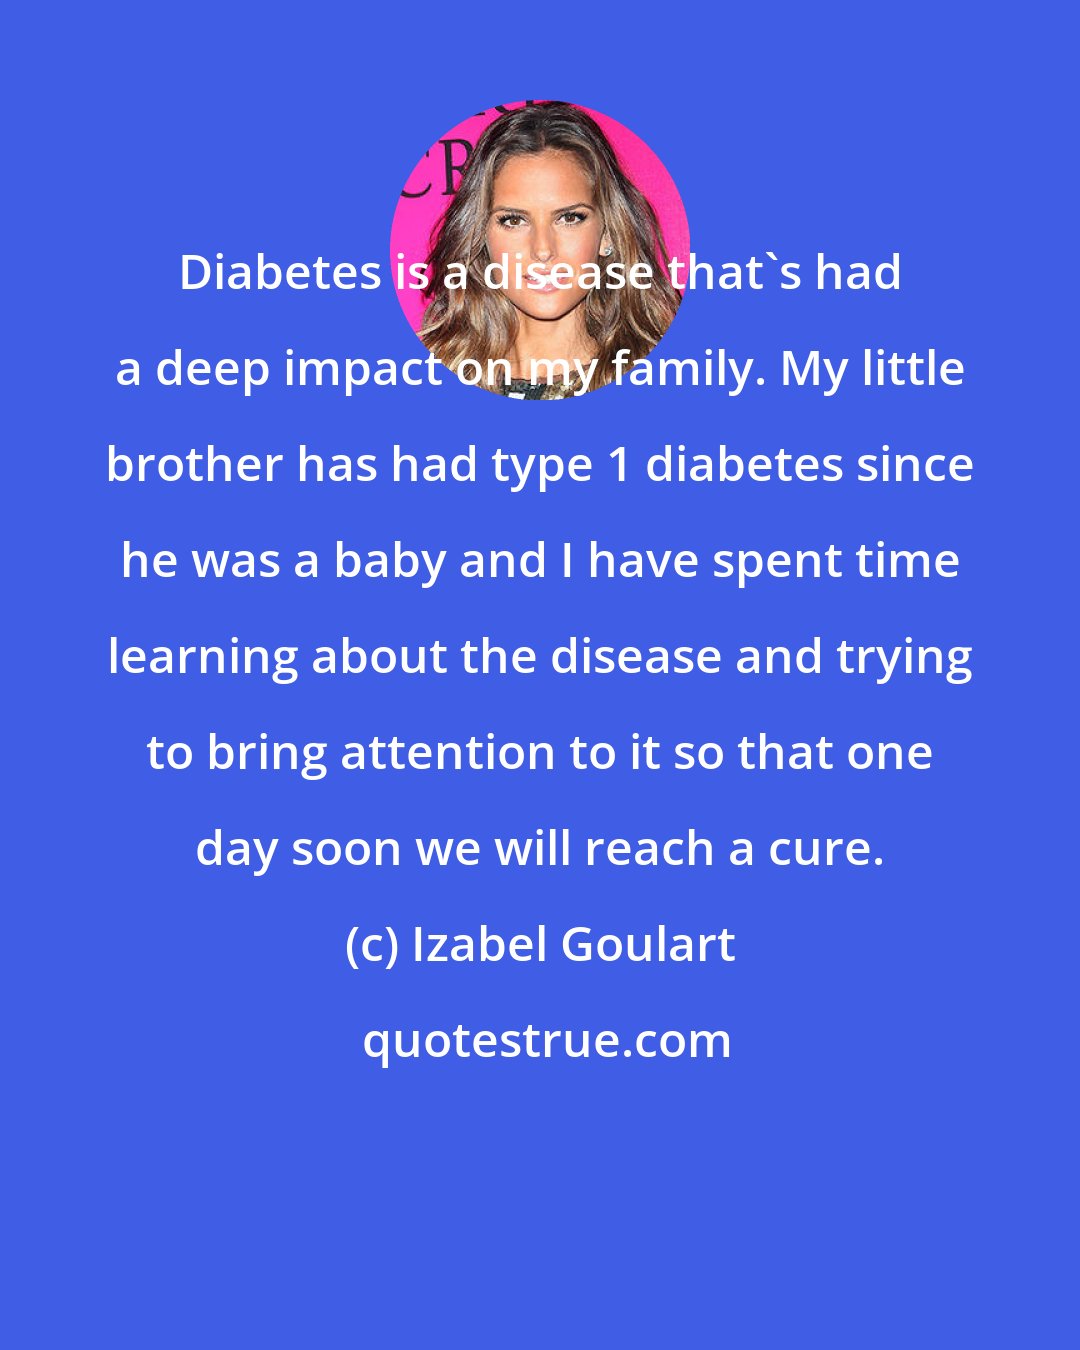 Izabel Goulart: Diabetes is a disease that's had a deep impact on my family. My little brother has had type 1 diabetes since he was a baby and I have spent time learning about the disease and trying to bring attention to it so that one day soon we will reach a cure.